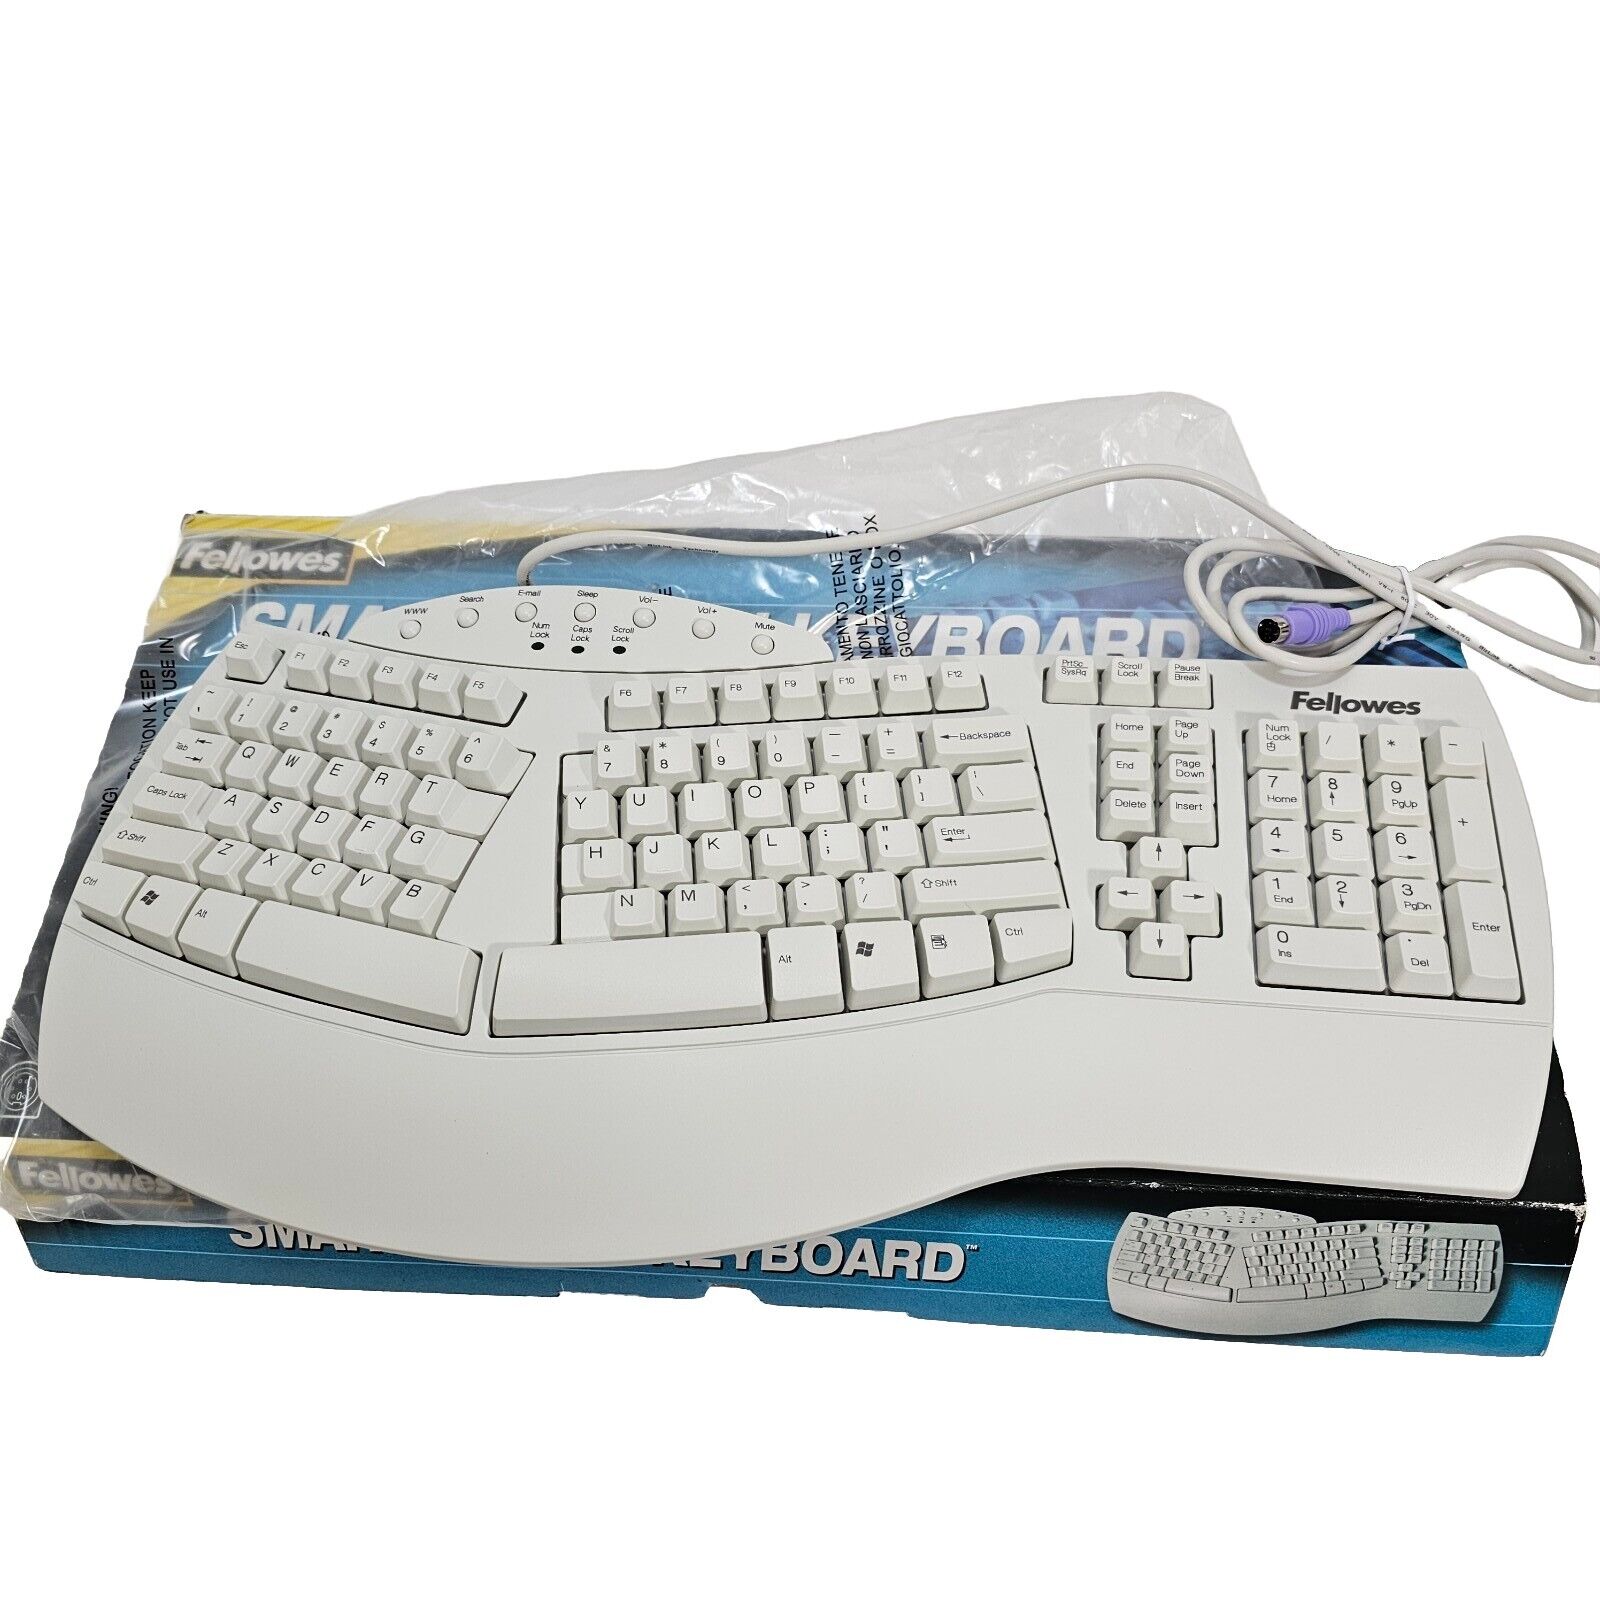 Fellowes Microban Ergonomic Wired PS/2 Keyboard KB-9938 New Open Box With CD